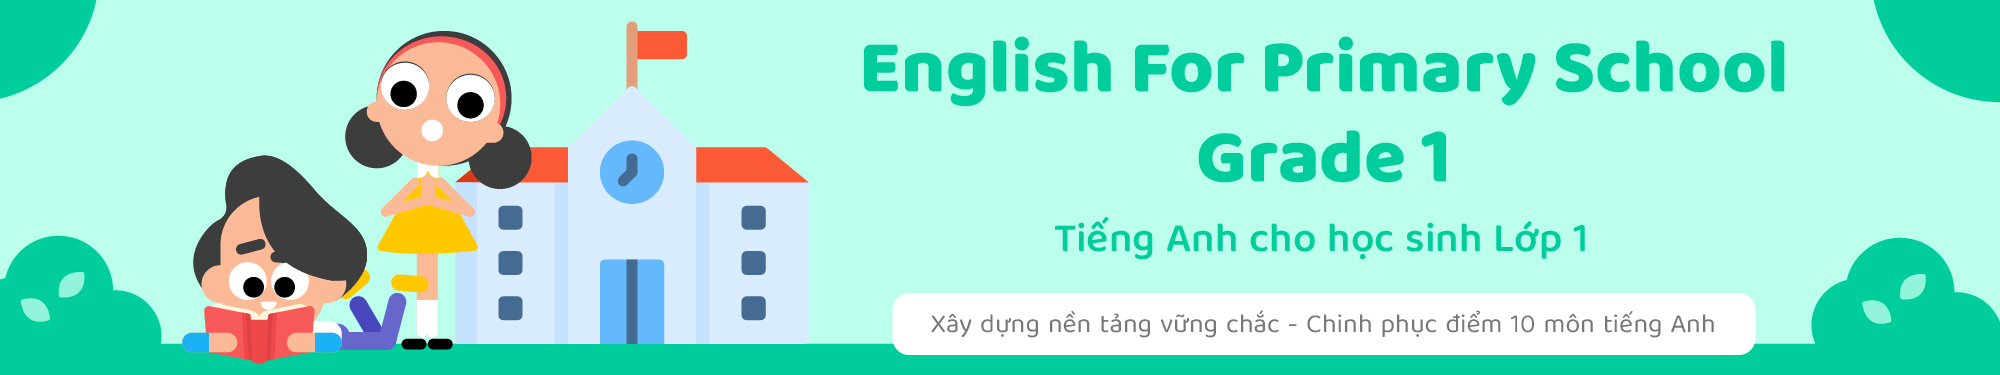 English for Primary School Grade 1 banner